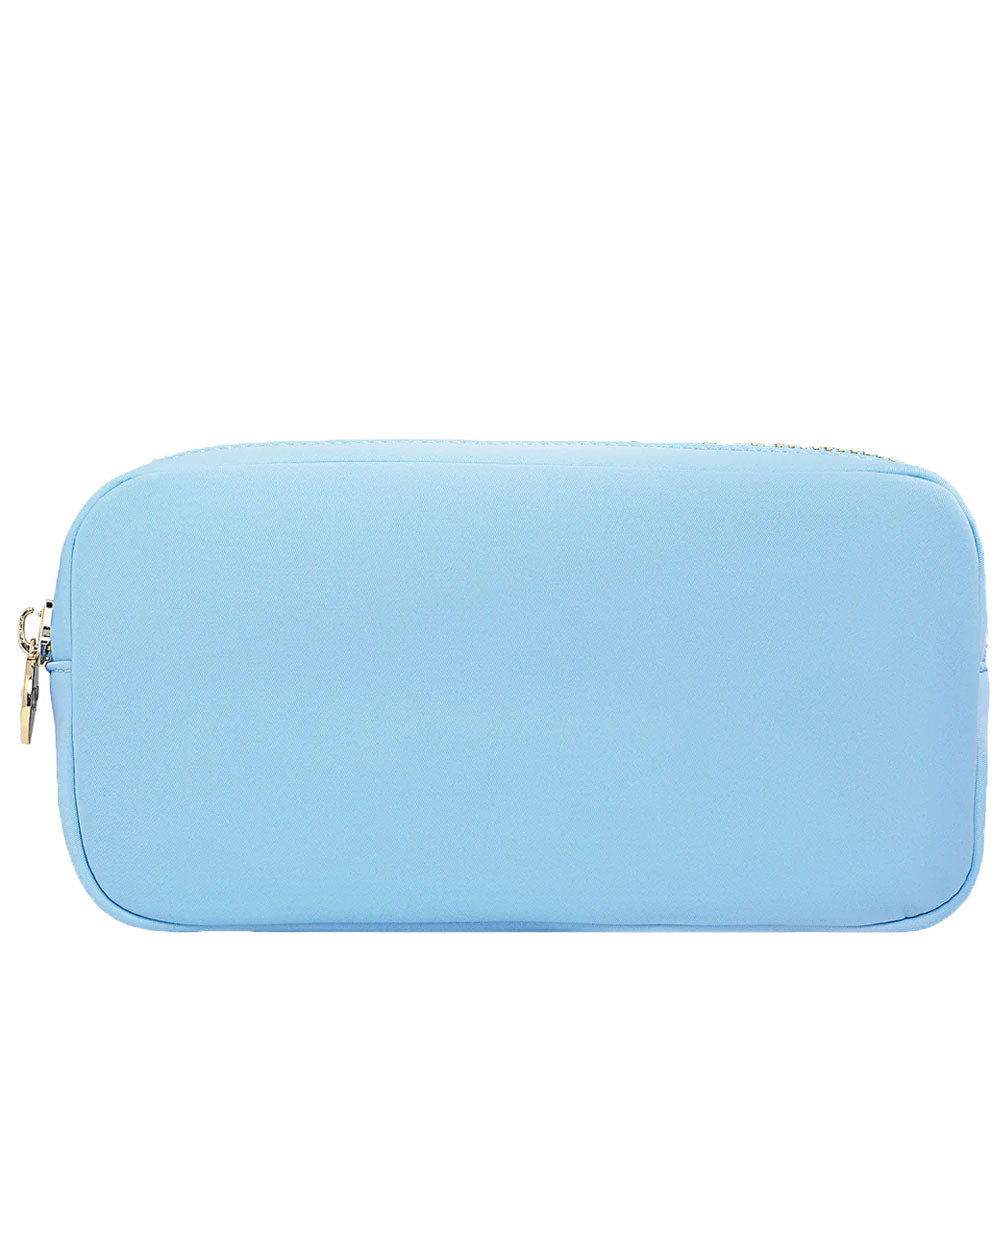 Stoney Clover Lane Classic Small Pouch - Periwinkle